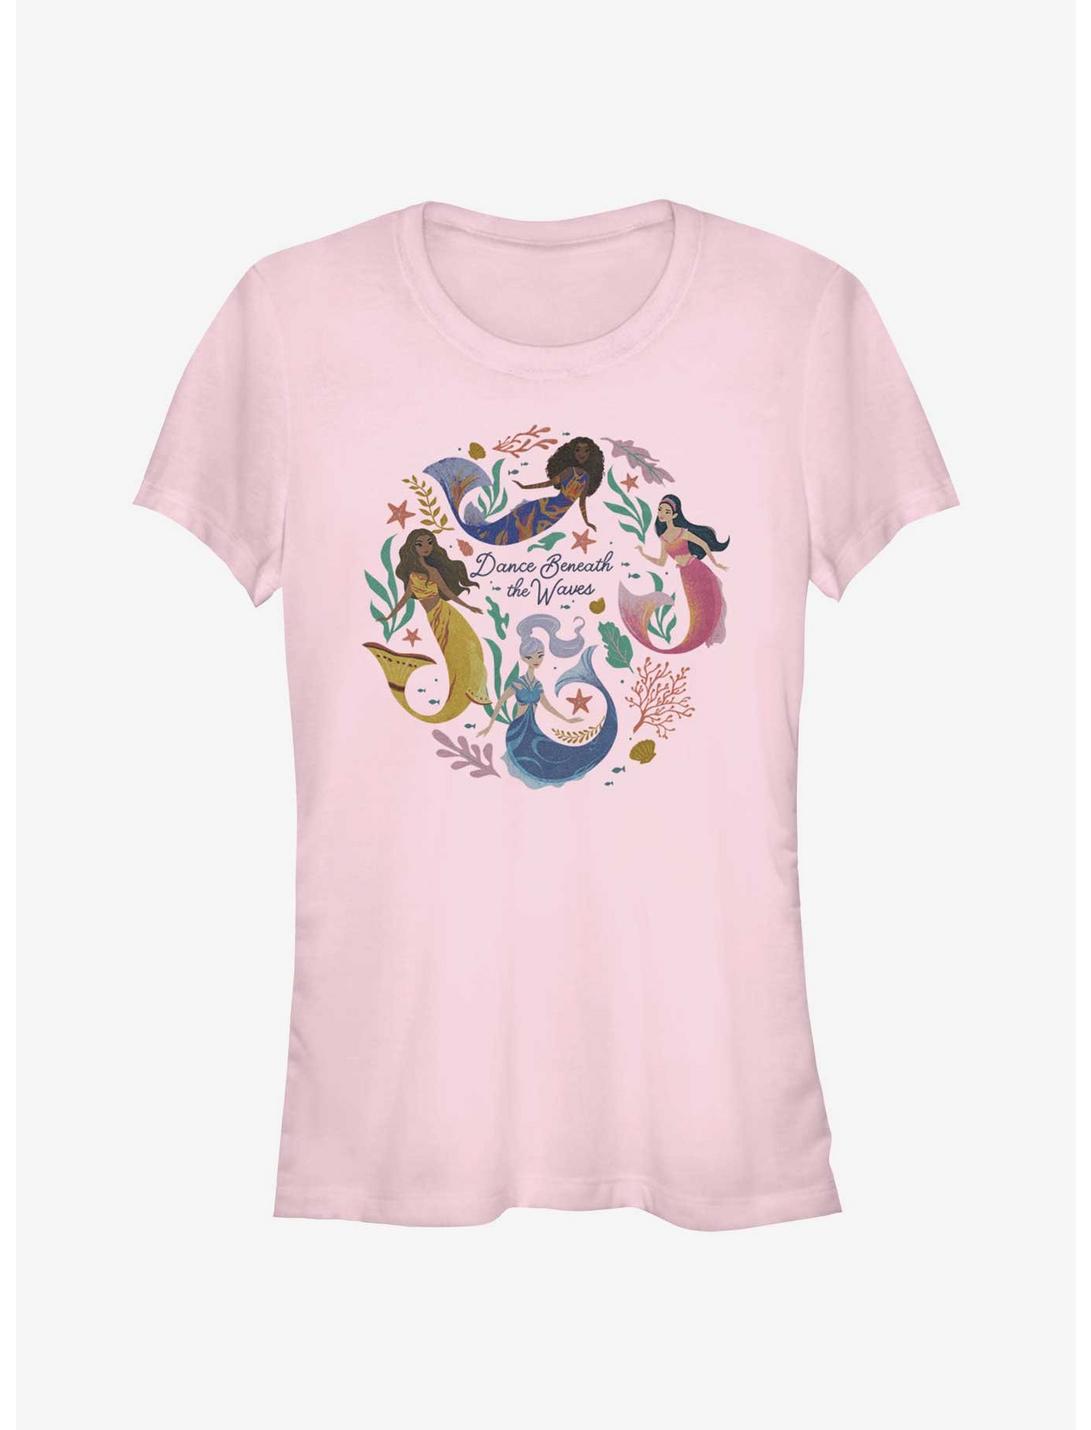 Disney The Little Mermaid Live Action Sisters Dance Beneath The Waves Girls T-Shirt, LIGHT PINK, hi-res